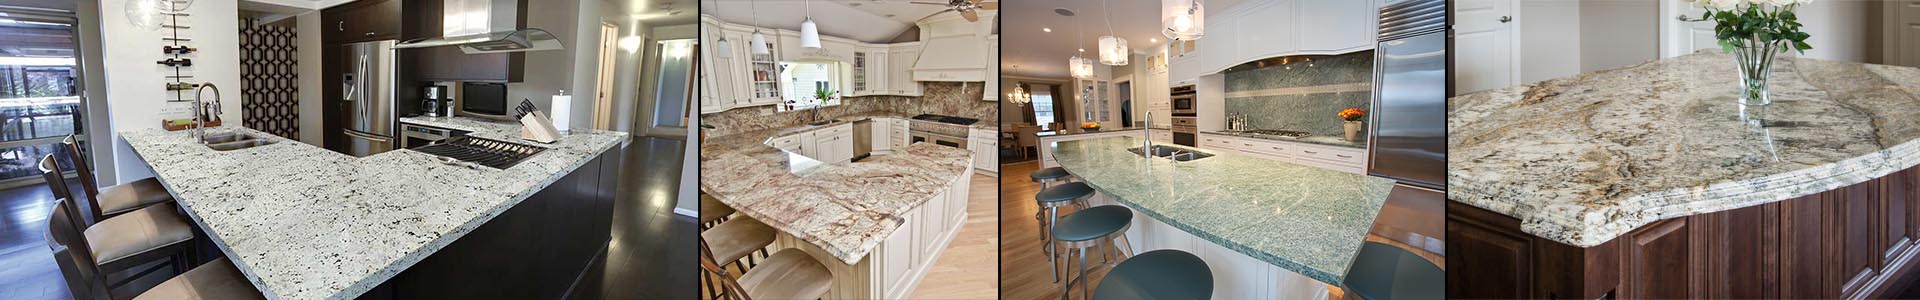 Raleigh S Granite Countertop Experts Renovate Your Home With Granite